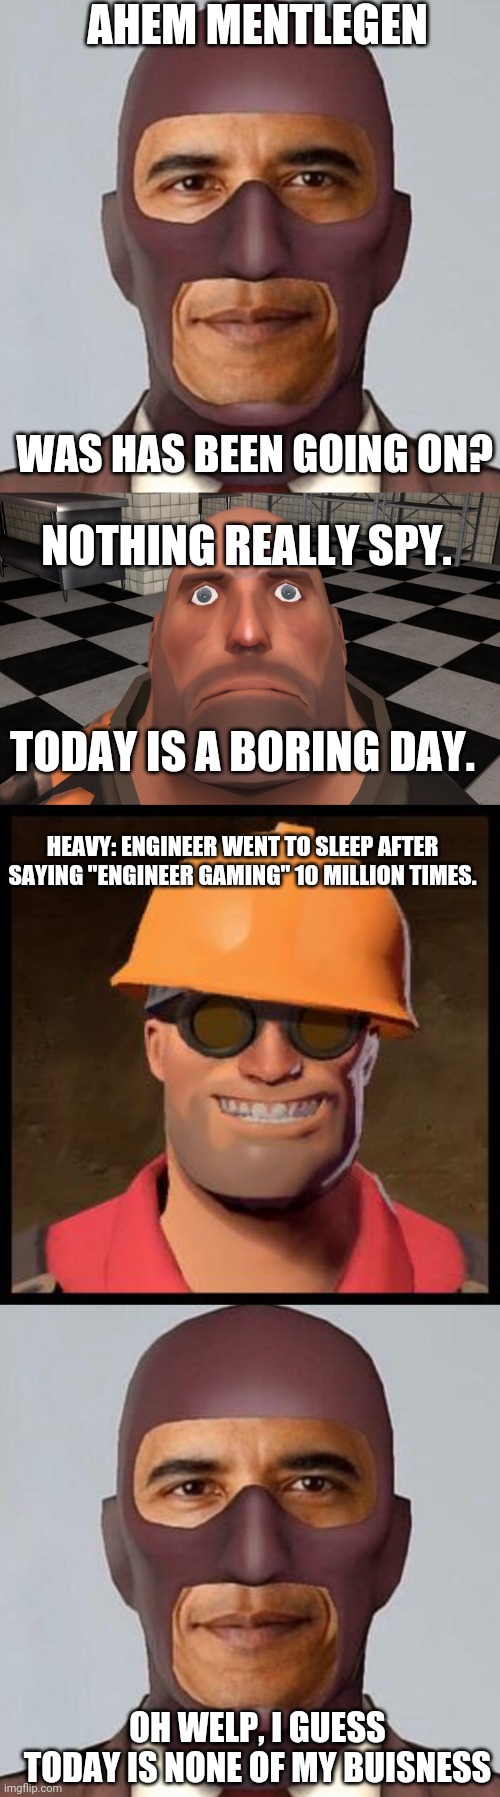 AHEM MENTLEGEN; WAS HAS BEEN GOING ON? NOTHING REALLY SPY. TODAY IS A BORING DAY. HEAVY: ENGINEER WENT TO SLEEP AFTER SAYING "ENGINEER GAMING" 10 MILLION TIMES. OH WELP, I GUESS TODAY IS NONE OF MY BUISNESS | image tagged in obama spy,stare,engineer tf2 | made w/ Imgflip meme maker